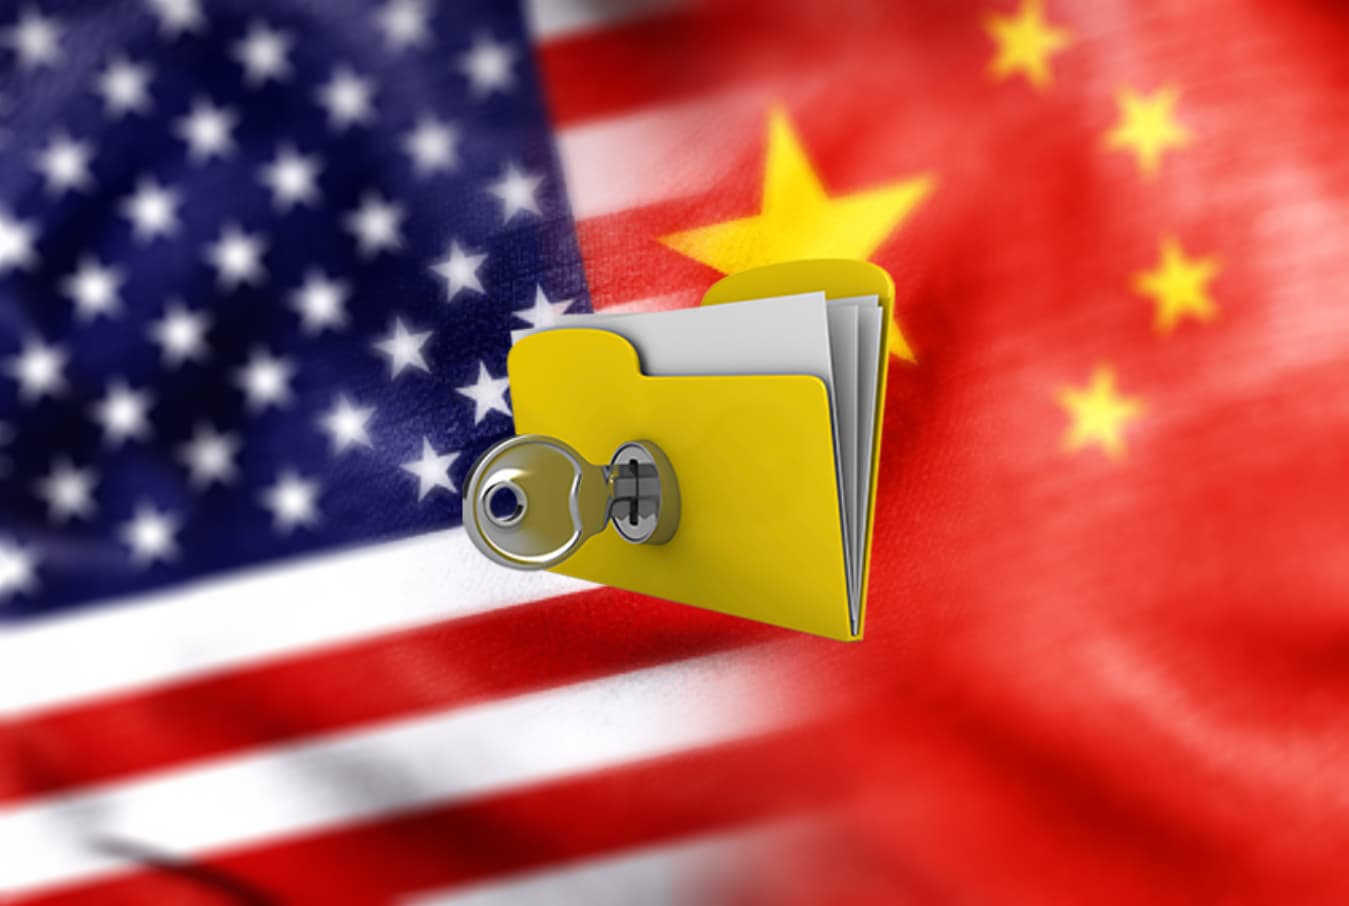 Personal data of millions of Americans exposed from PC in China